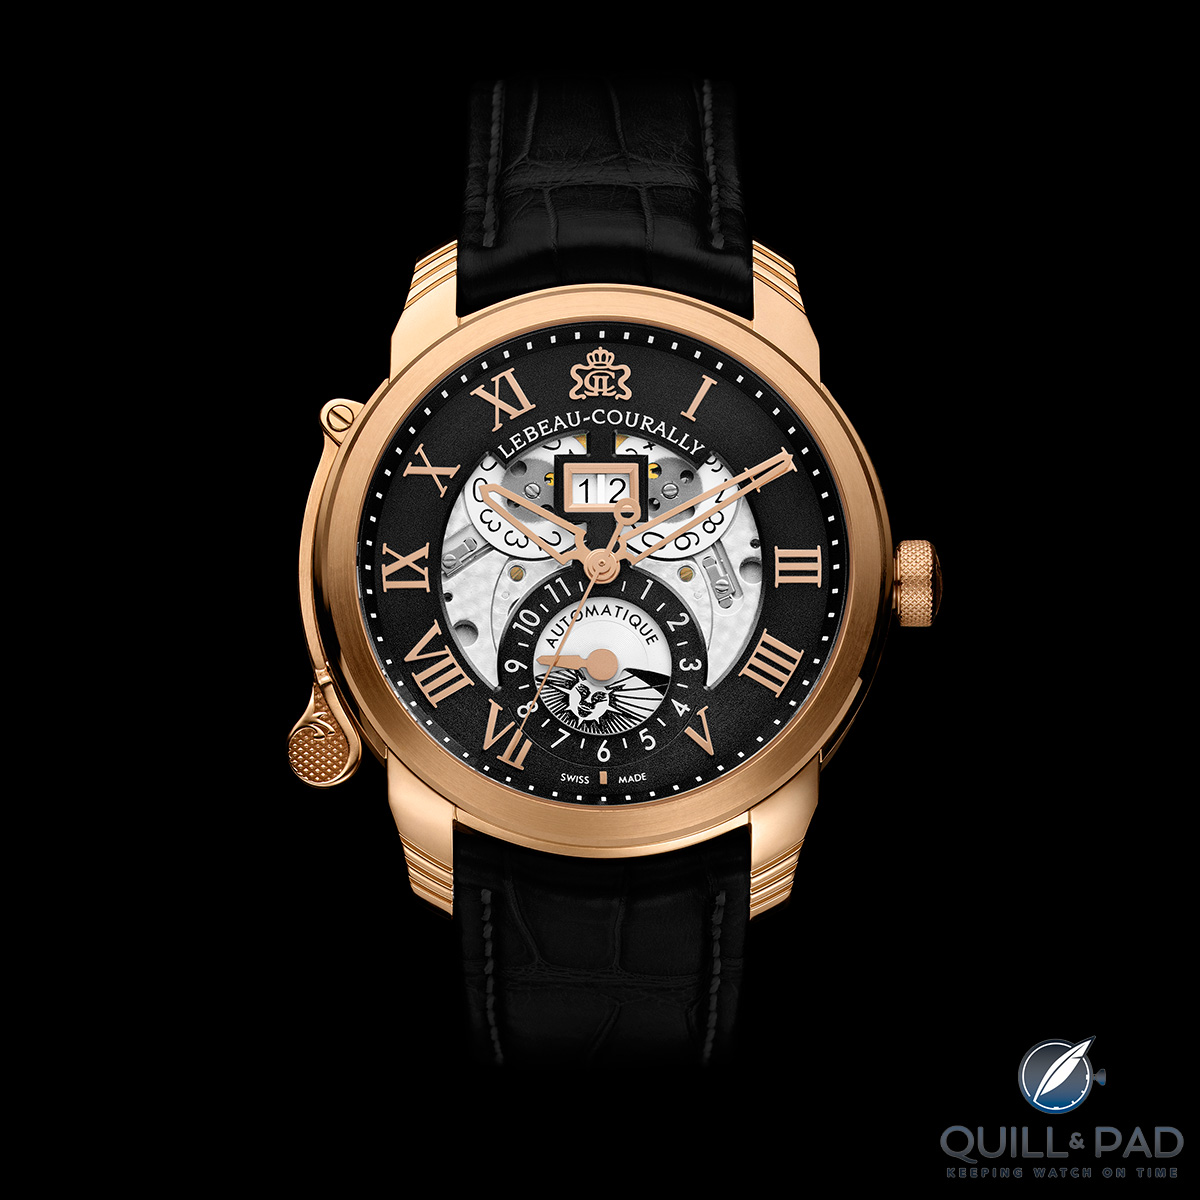 High Quality Lebeau-Courally Replica : From Gunsmithing To Haute Horlogerie